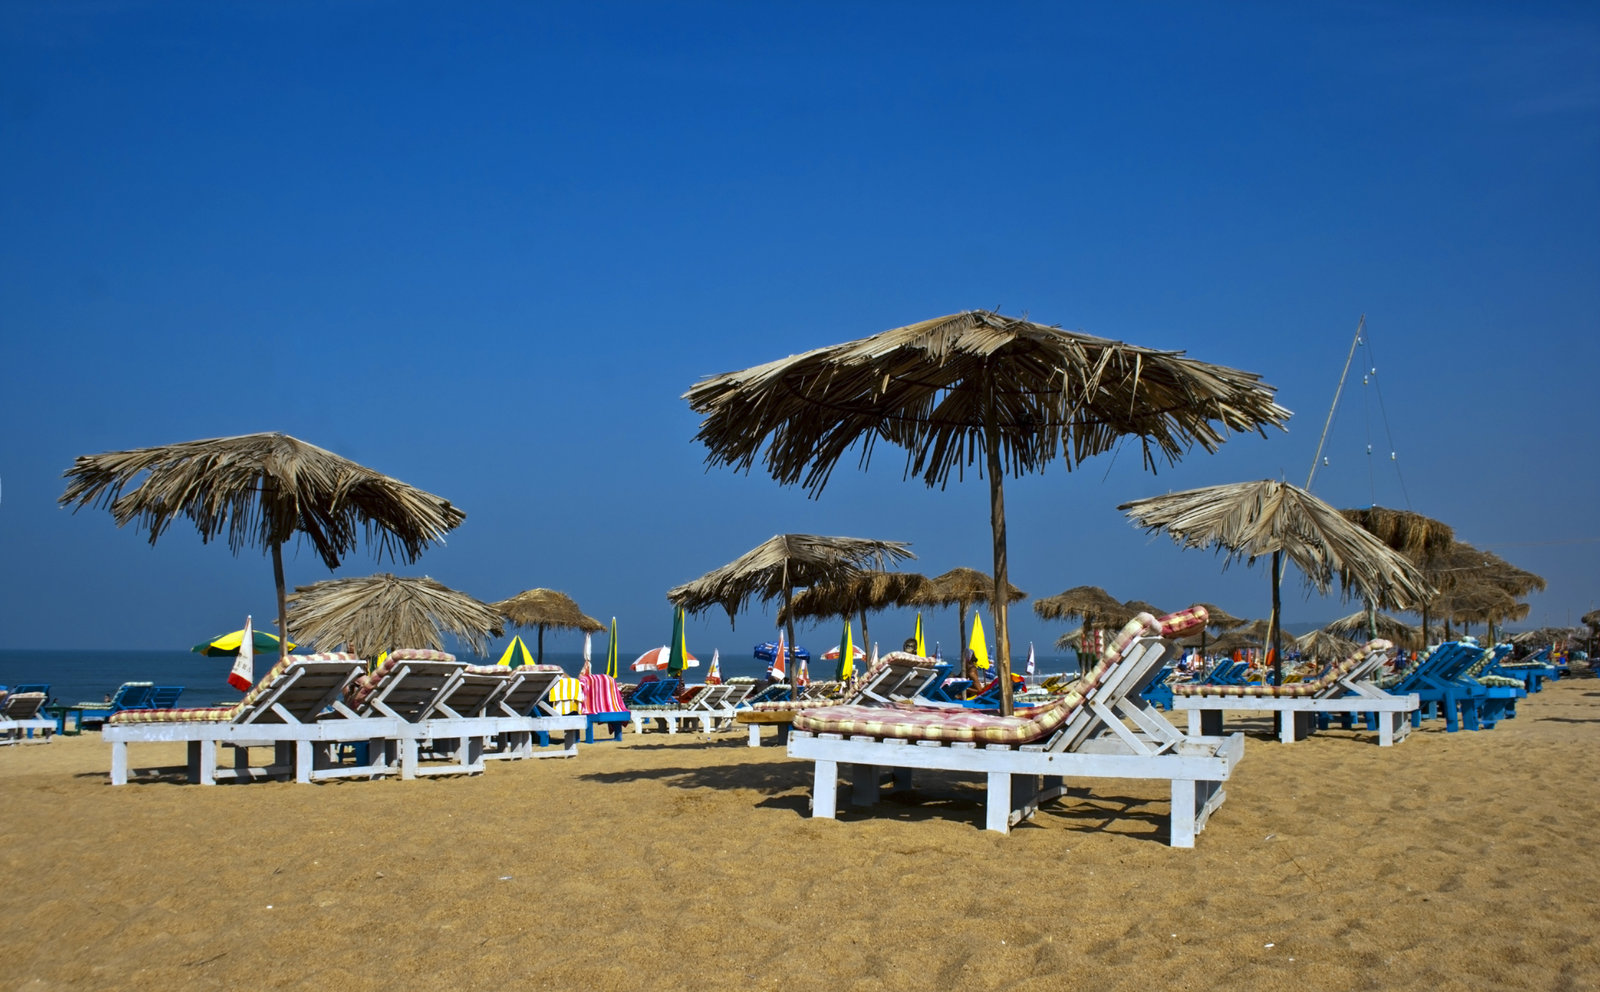 It is the longest beach in North Goa which stretches from Candolim to Baga.